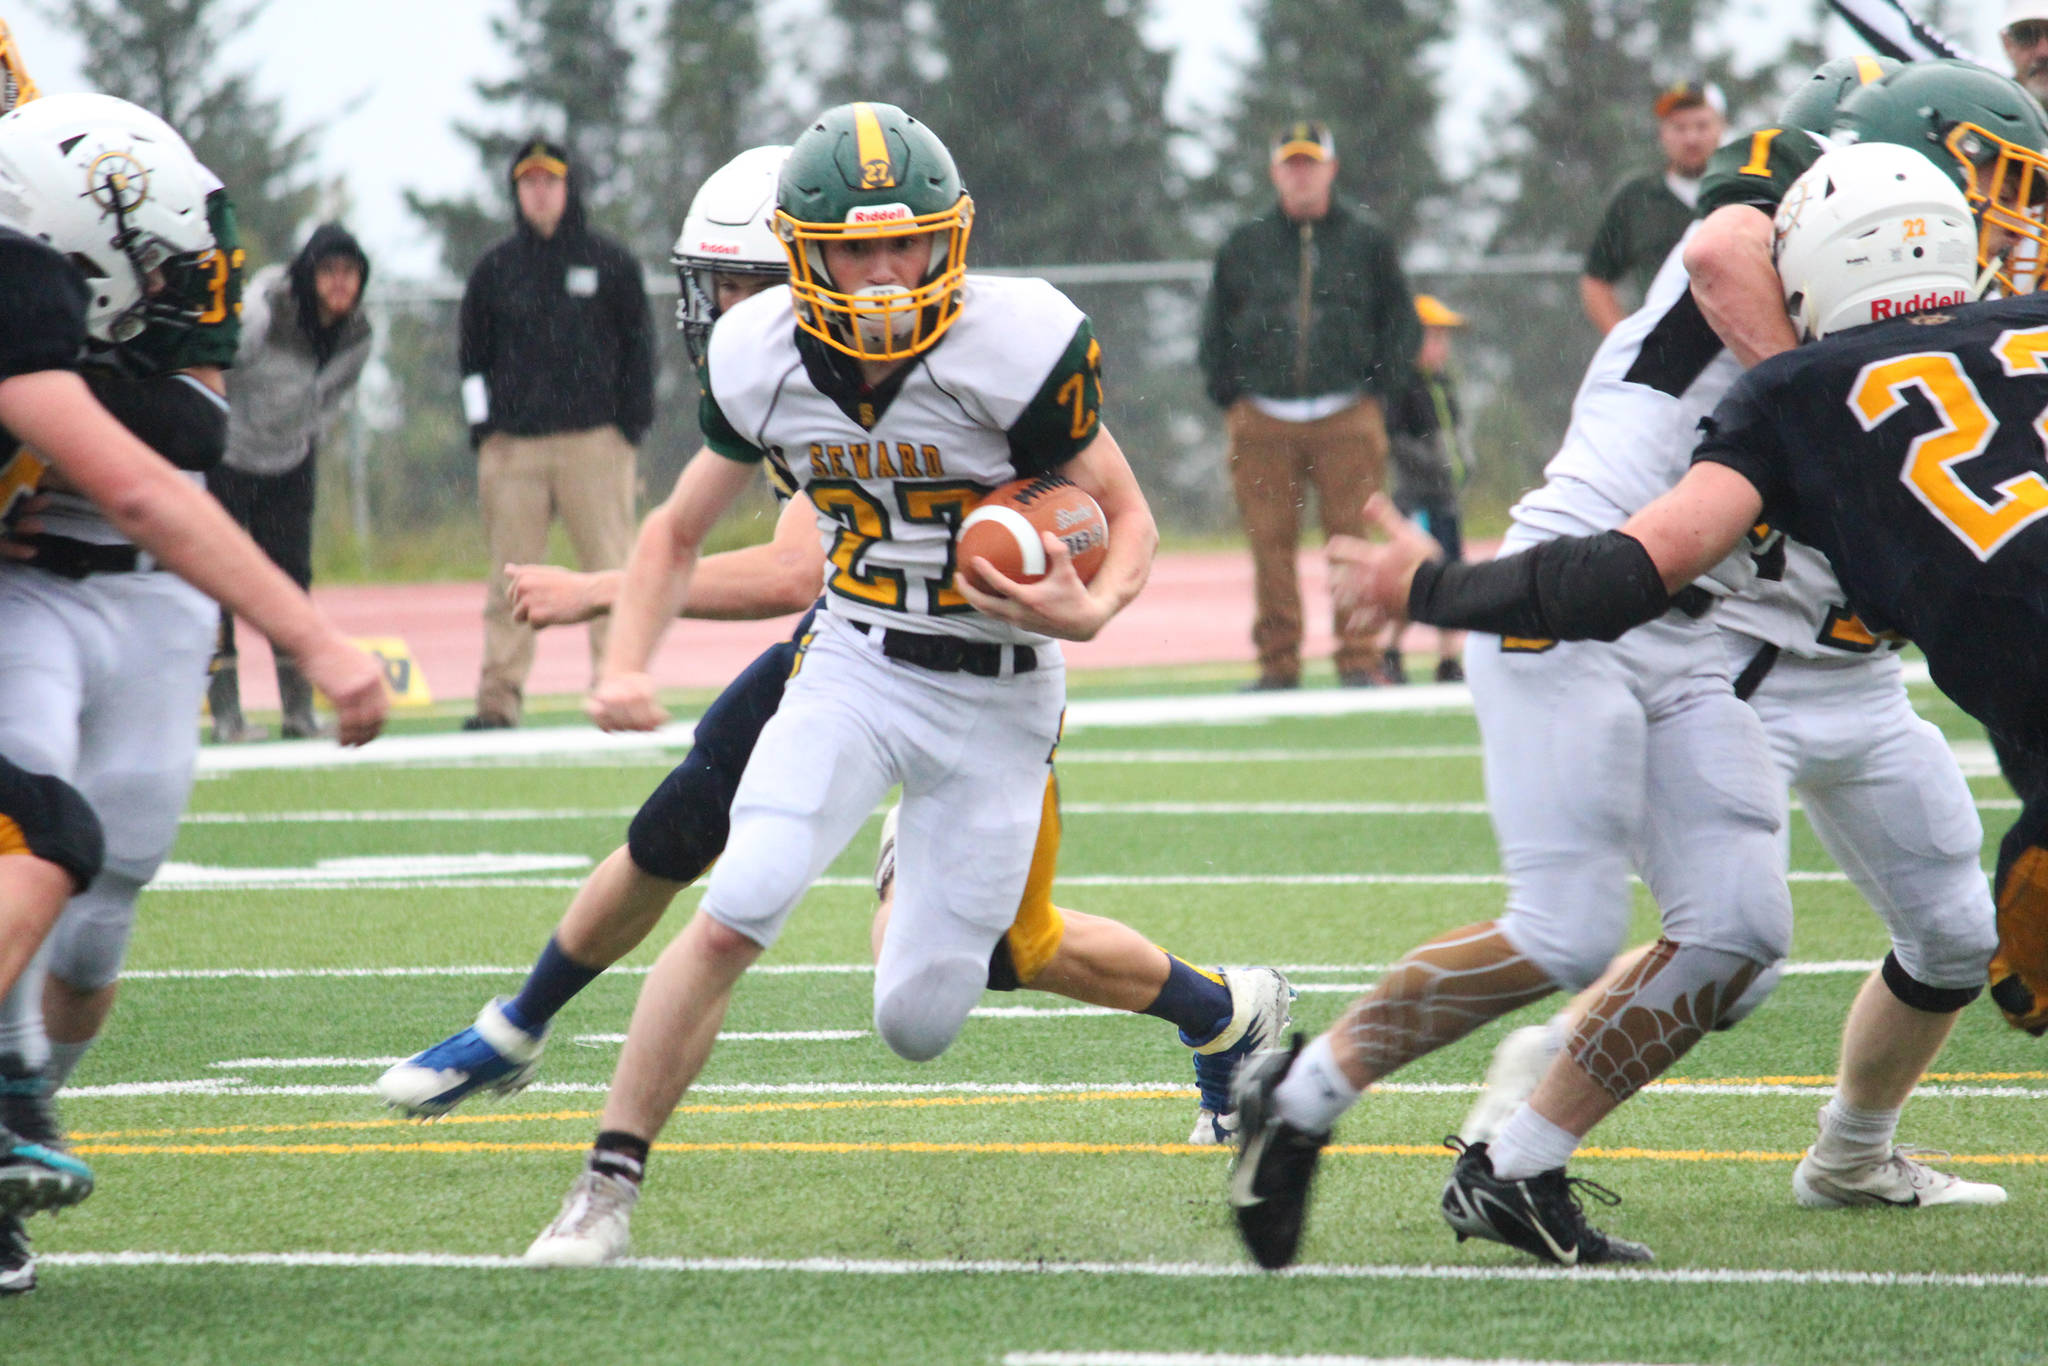 Seward’s Shane Sullivan finds an opening to run the ball through during Homer High School’s homecoming game Friday, Sept. 21, 2018 at the high school in Homer, Alaska. The Mariners beat the Seahawks 21-20. (Photo by Megan Pacer/Homer News)